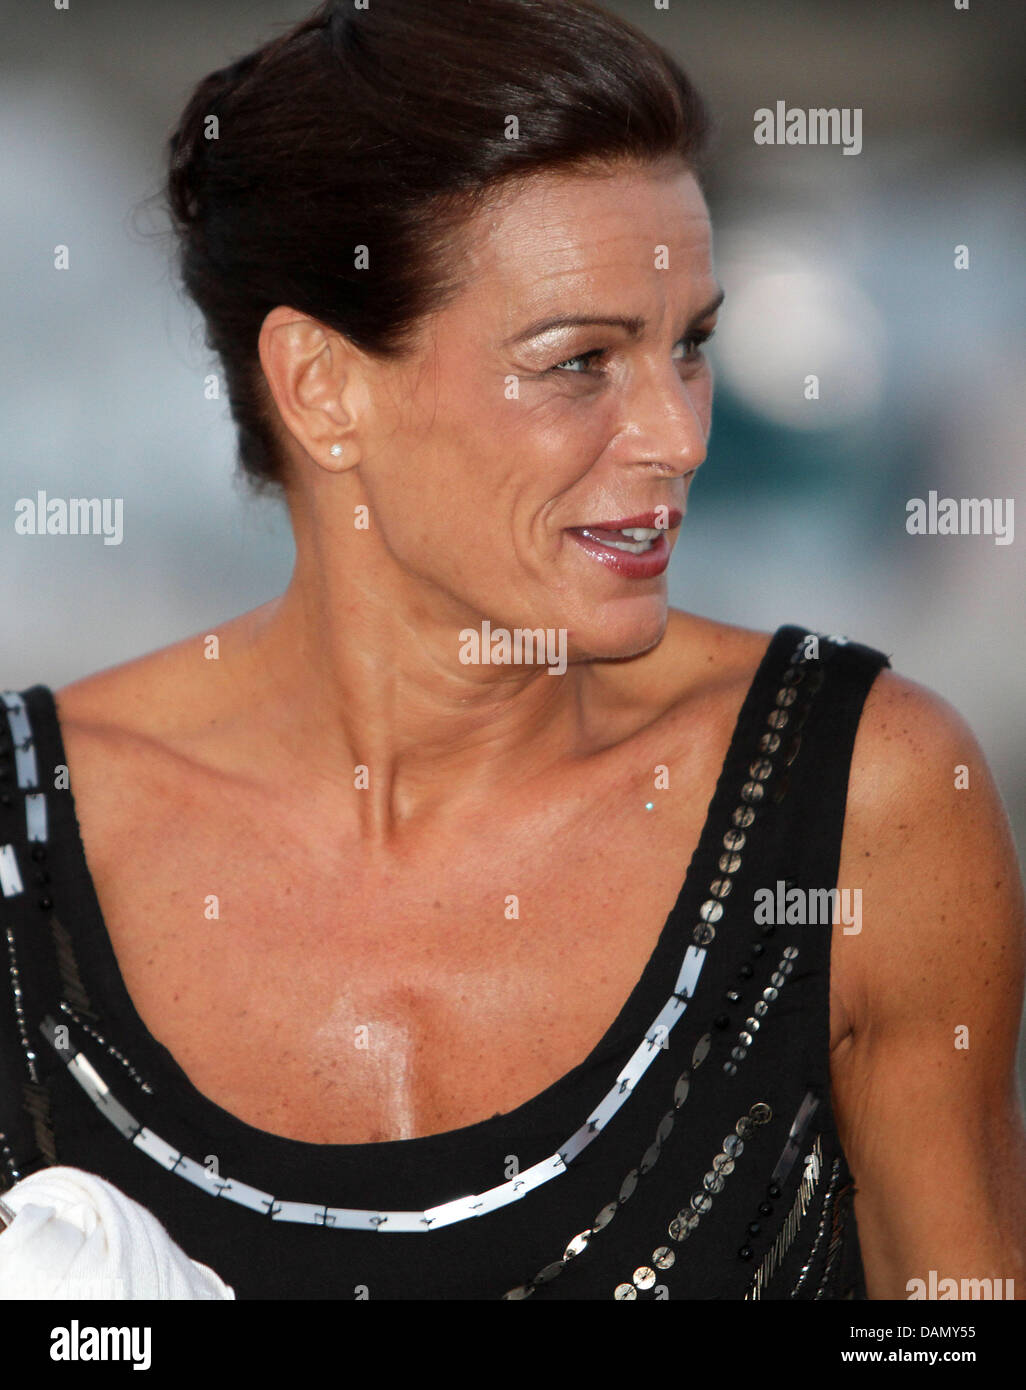 Princess Stephanie of Monaco during the Show of Jean Michel Jarre on the occasion of the wedding of Prince Albert II. in the harbour of Monte Carlo, 1 July 2011. Photo: Albert Nieboer Stock Photo